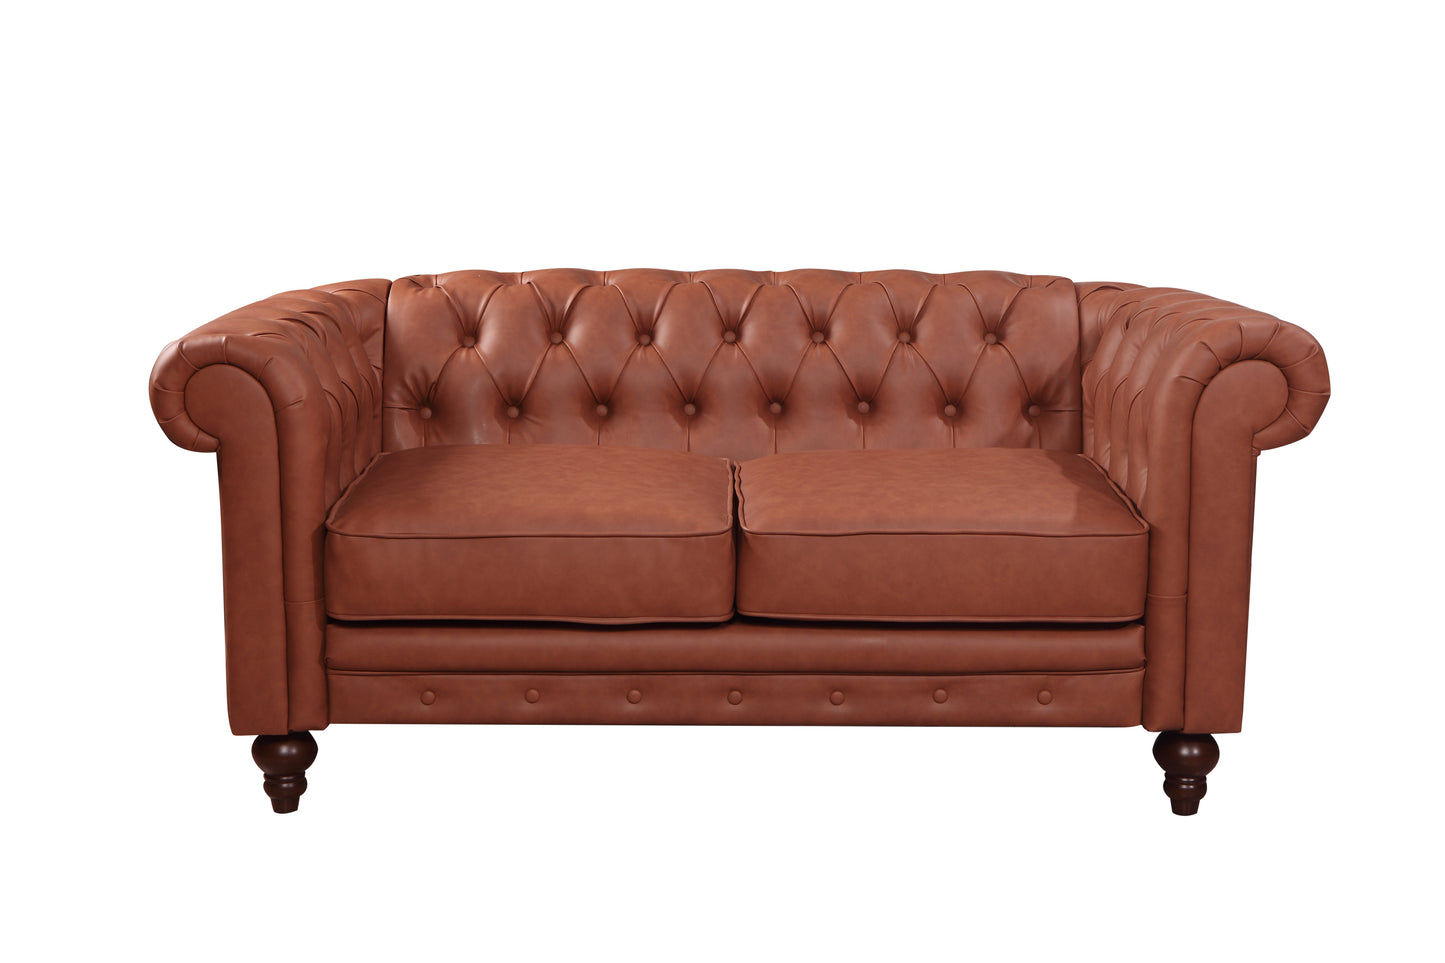 Mabel 2 Seater Sofa Lounge Chesterfield Style Button Tufted in Faux Leather - Brown